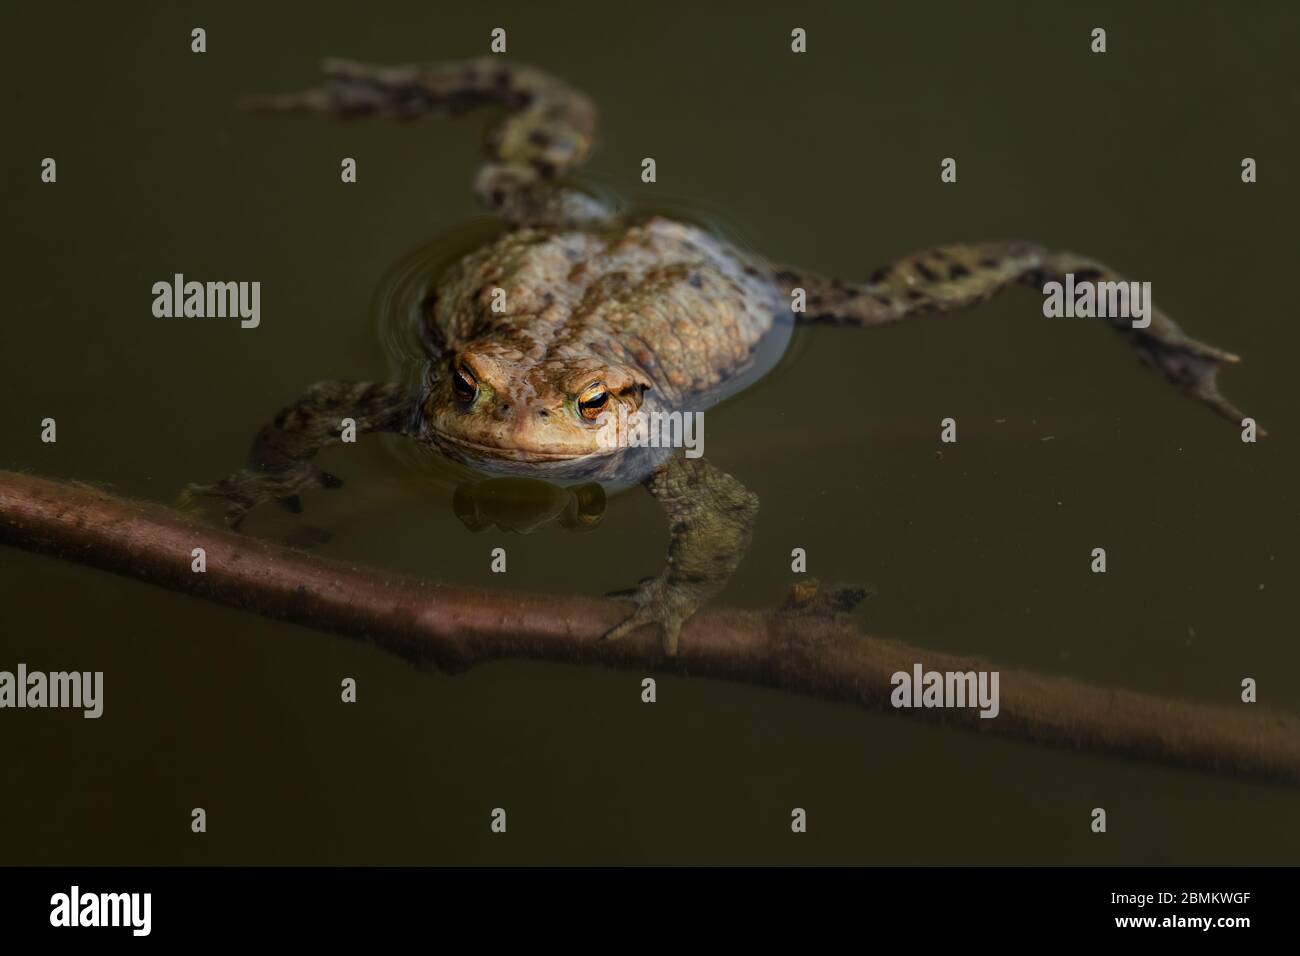 Common European Toad - Bufo bufo, large frog from European rivers and lakes, Zlin, Czech Republic. Stock Photo